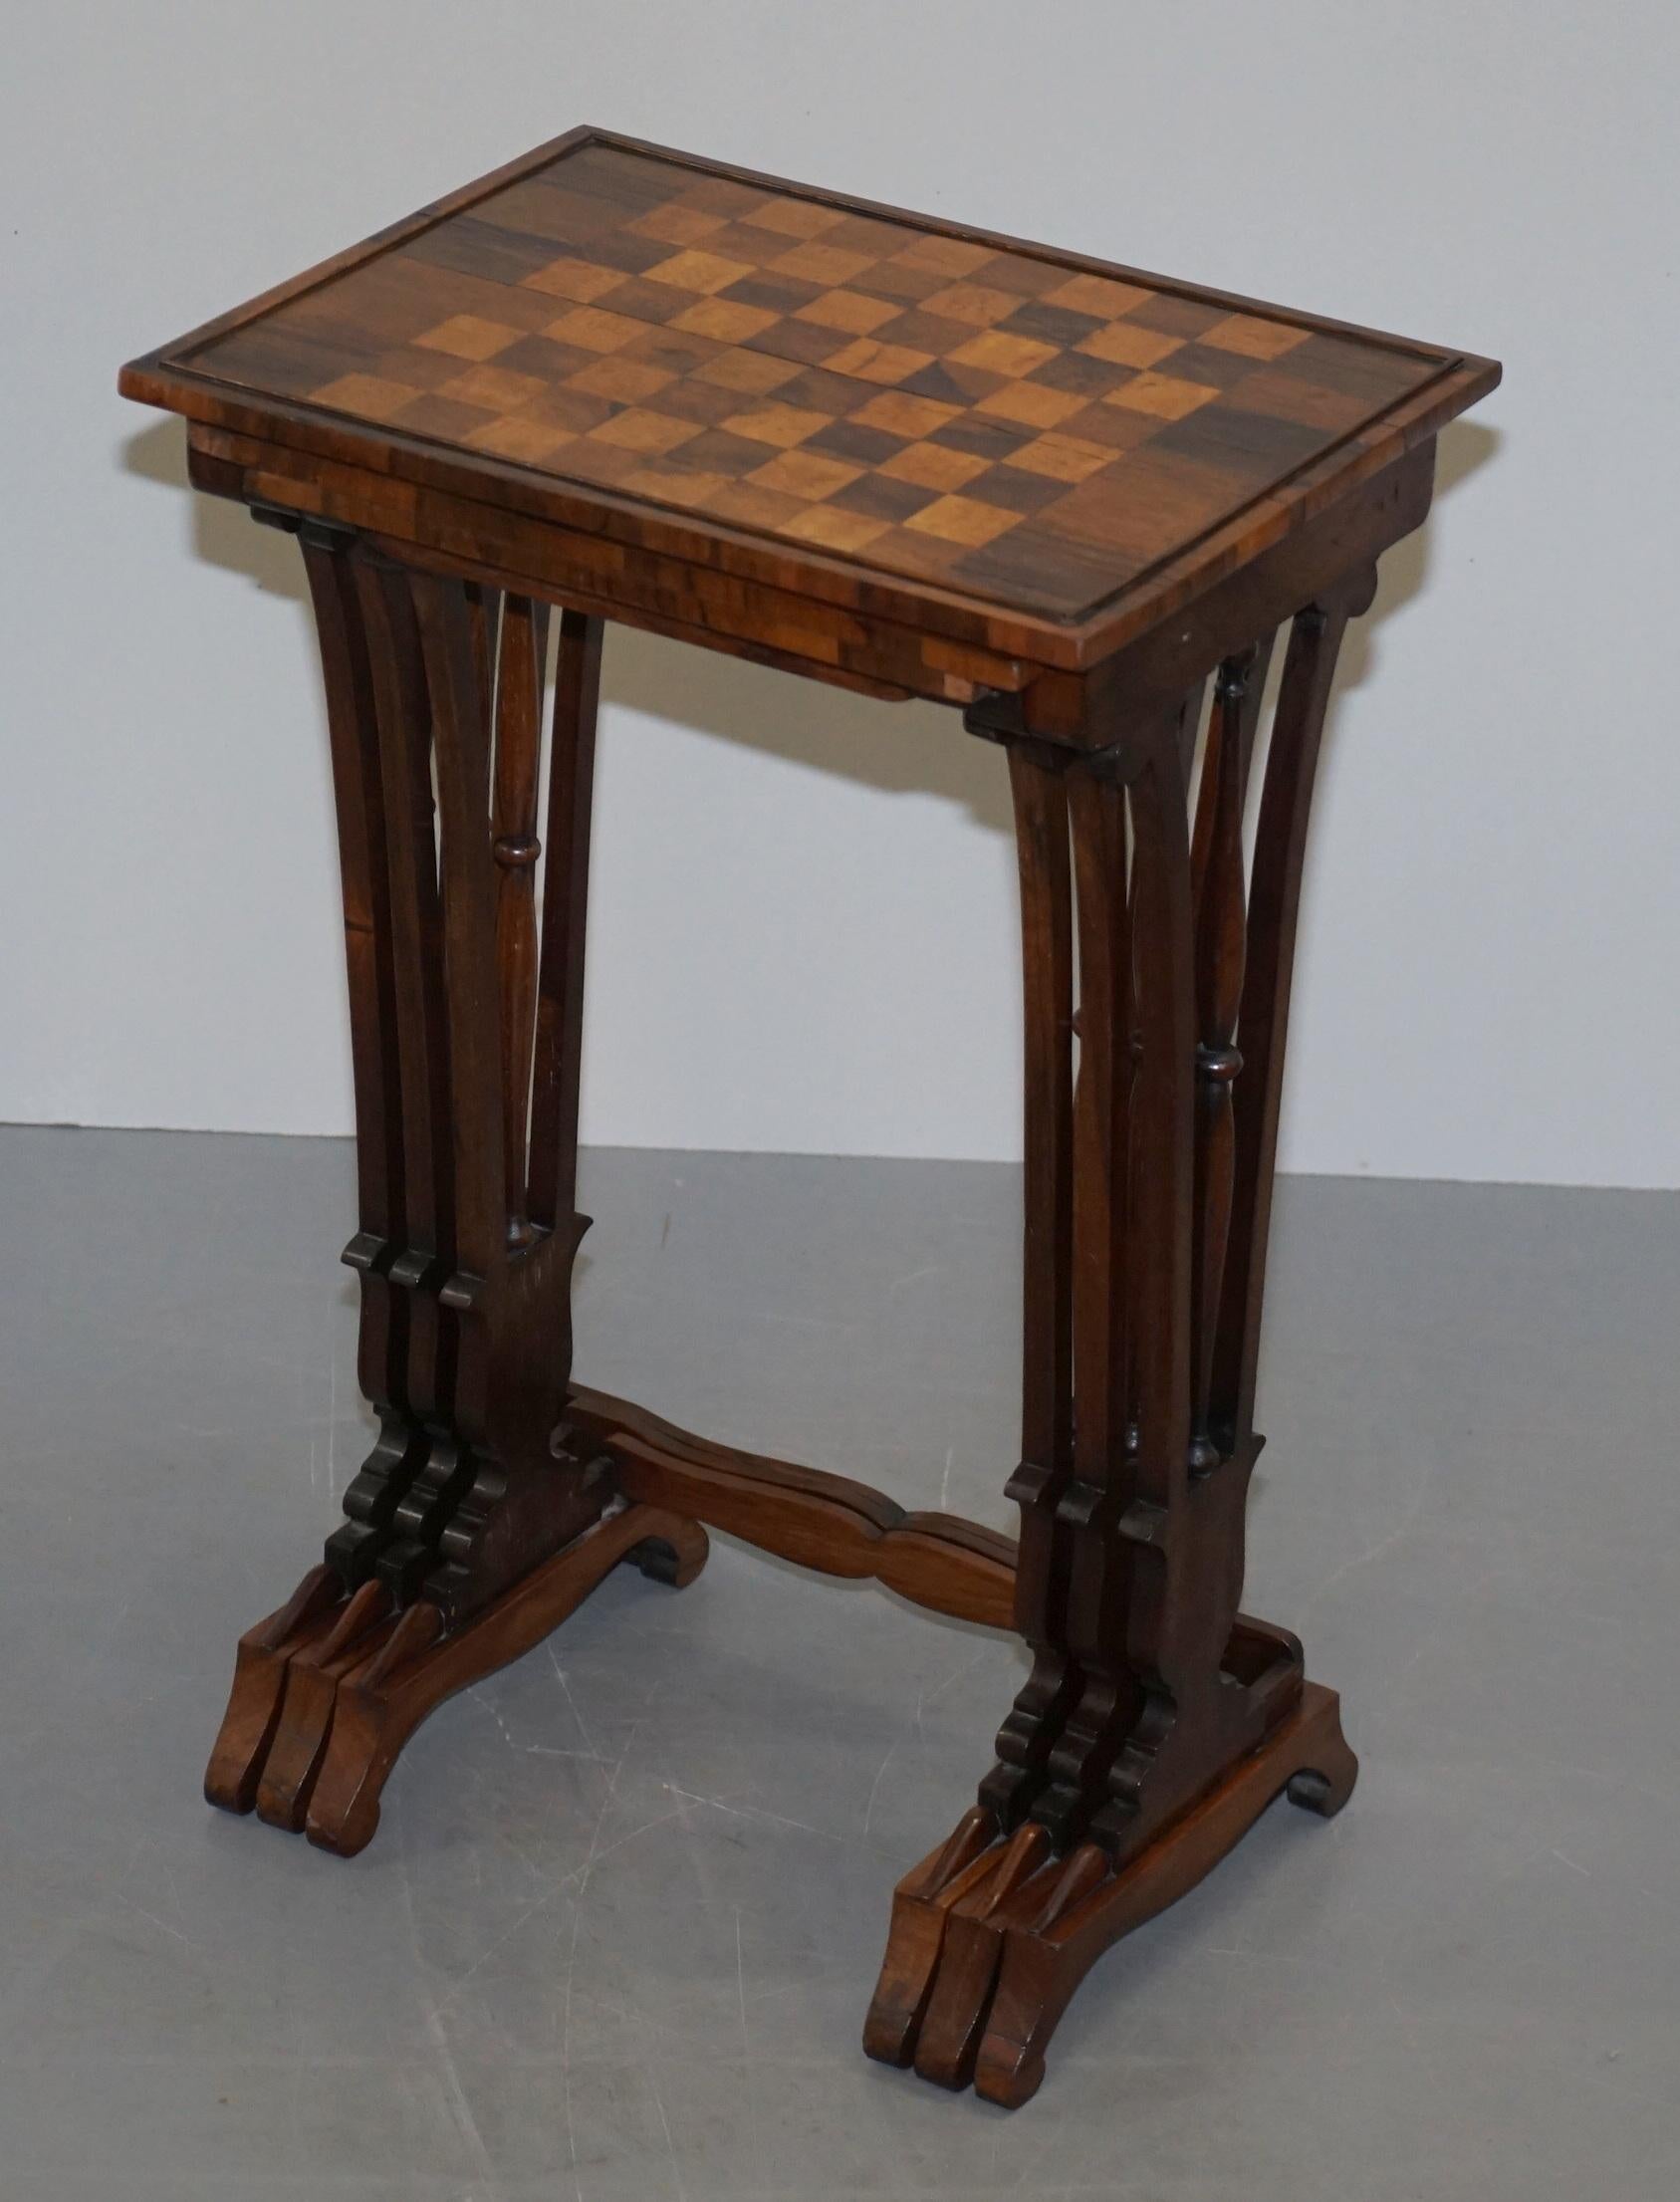 Hand-Crafted Fine Regency Nest of Hardwood Tables with Chessboard Top Attributed to Gillows For Sale